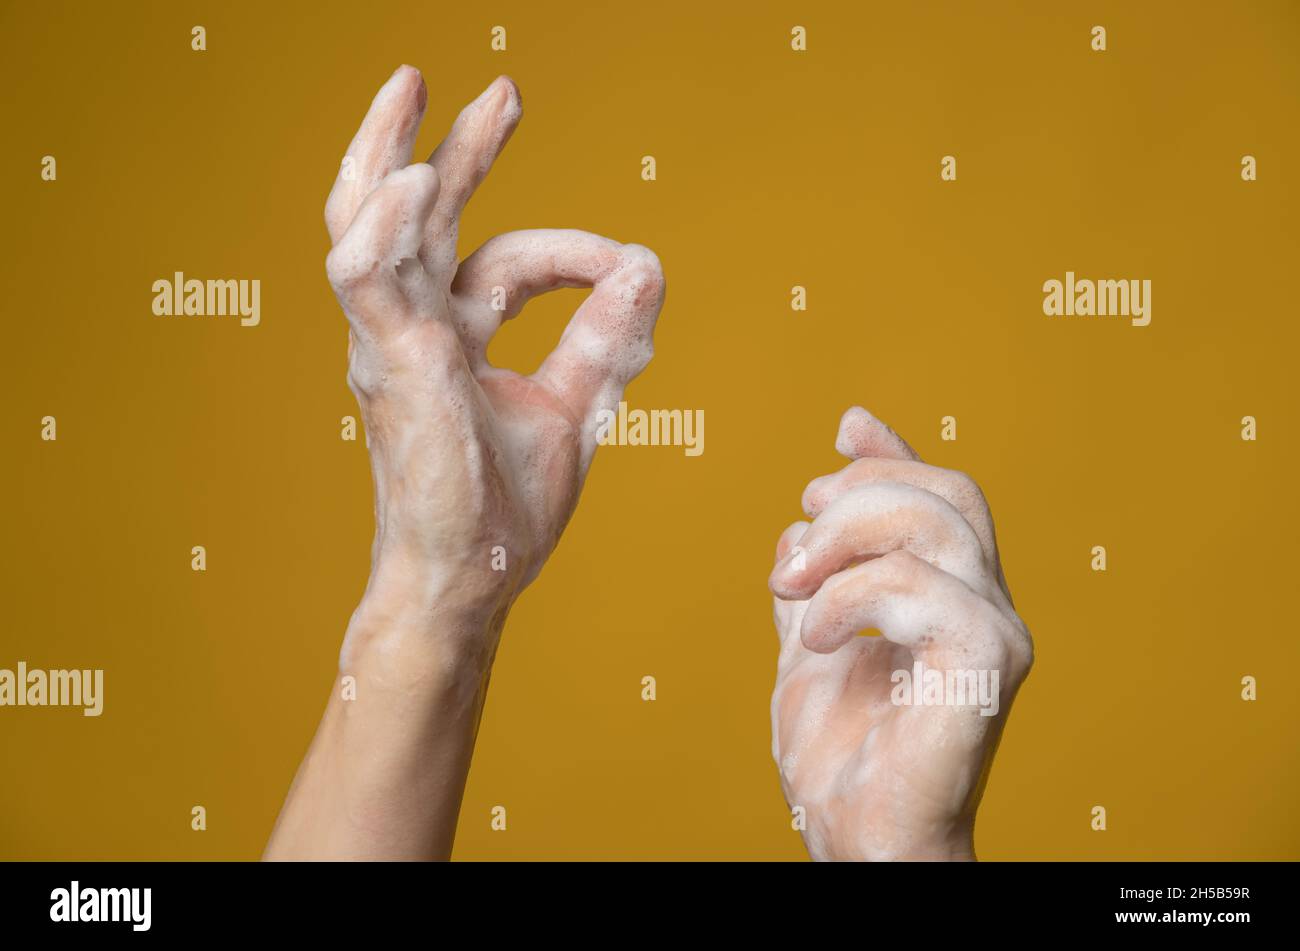 Hands in soapy foam, one of them shows a ok sign with her fingers. Concept for an effective way to prevent the spread of infections.  Stock Photo